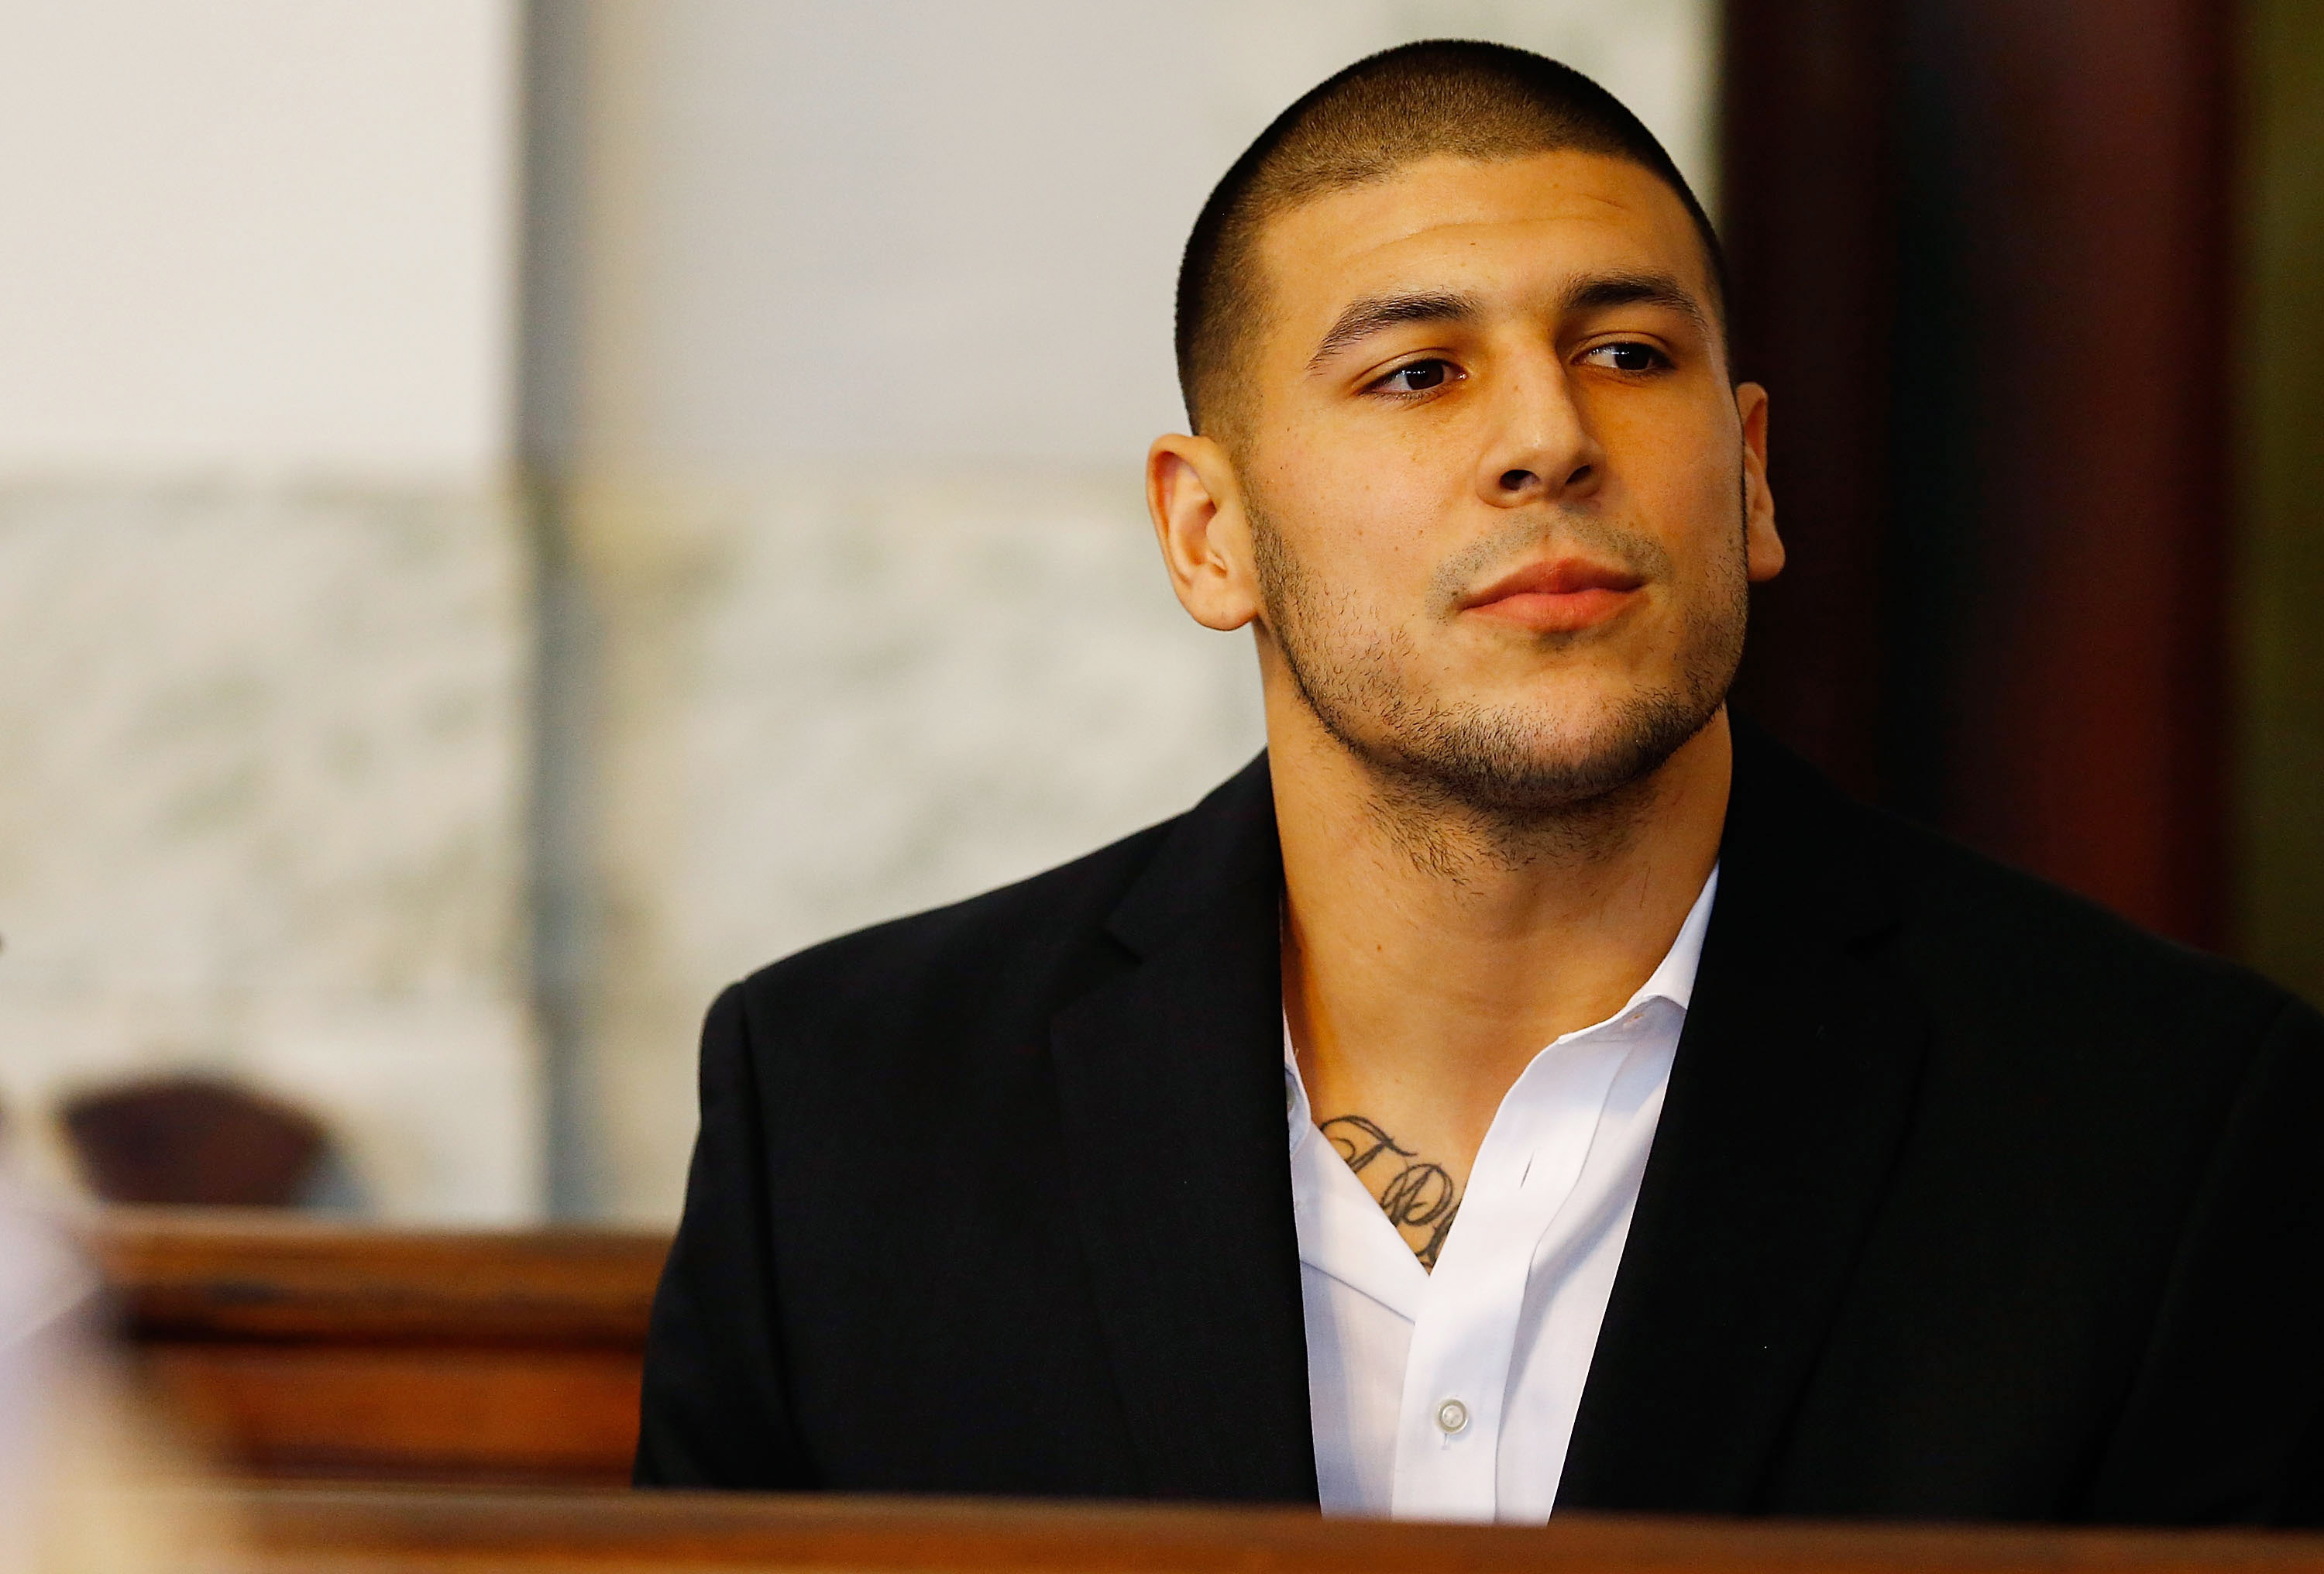 Aaron Hernandez sits in the courtroom of the Attleboro District Court during his hearing on Aug. 22, 2013 in North Attleboro, Massachusetts. (Jared Wickerham—Getty Images)